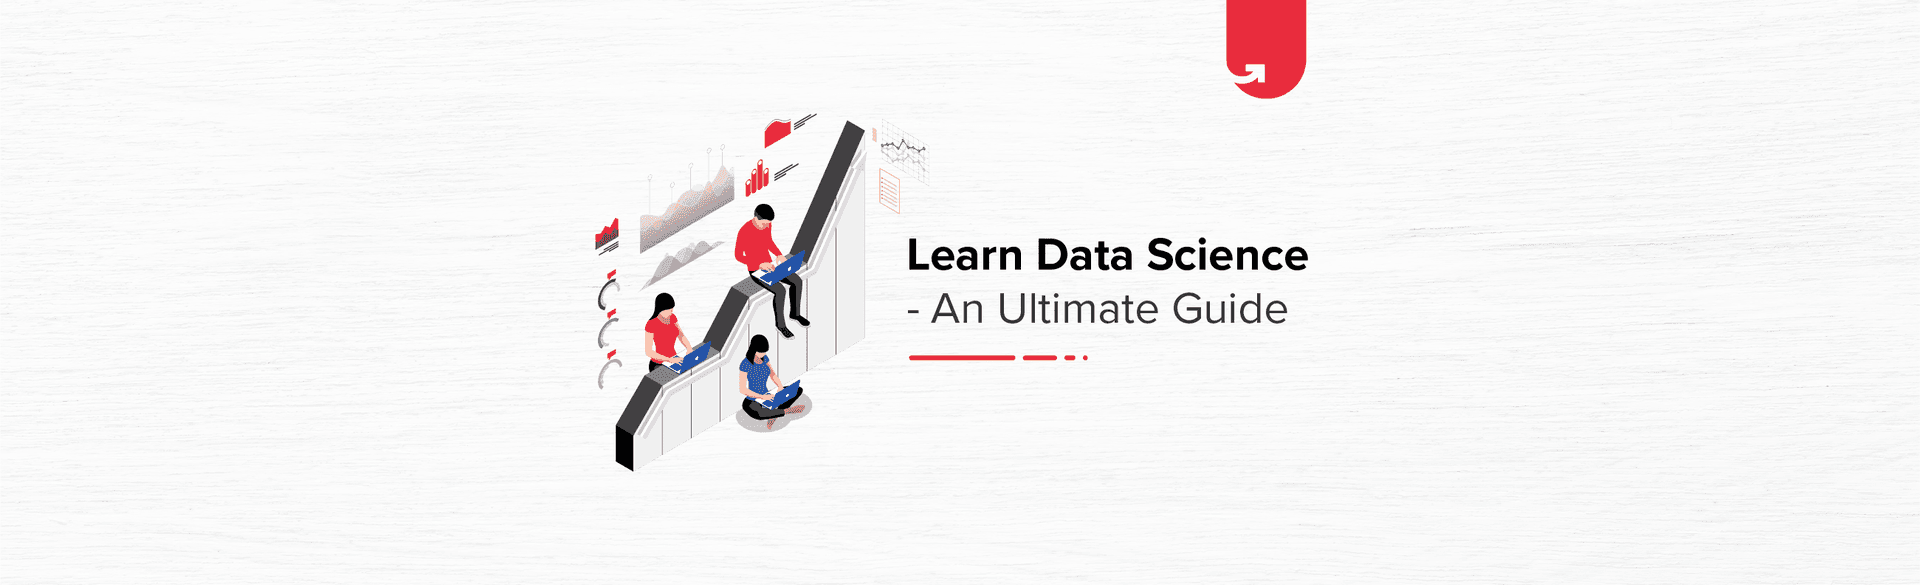 Learn Data Science – An Ultimate Guide to become Data Scientist